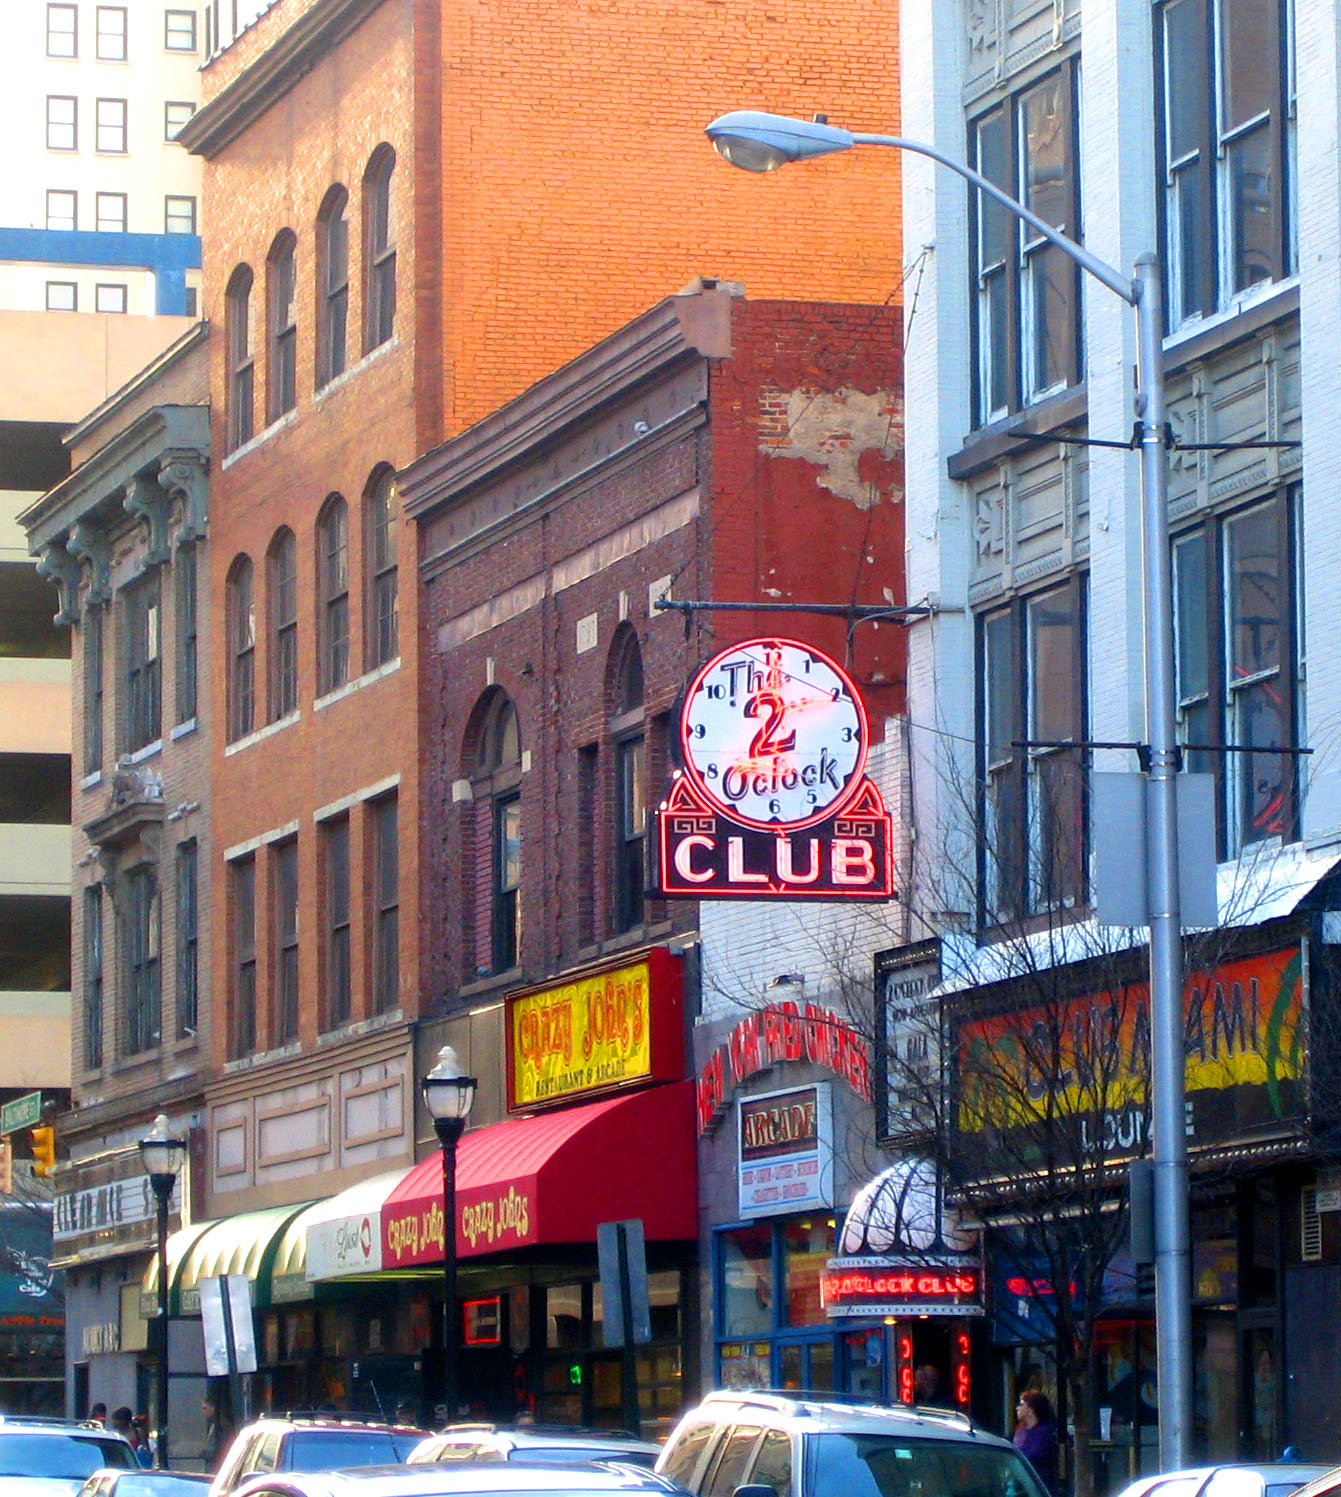 File:2 o'clock club in Baltimore, Maryland exterior.jpg - Wikimedia Commons